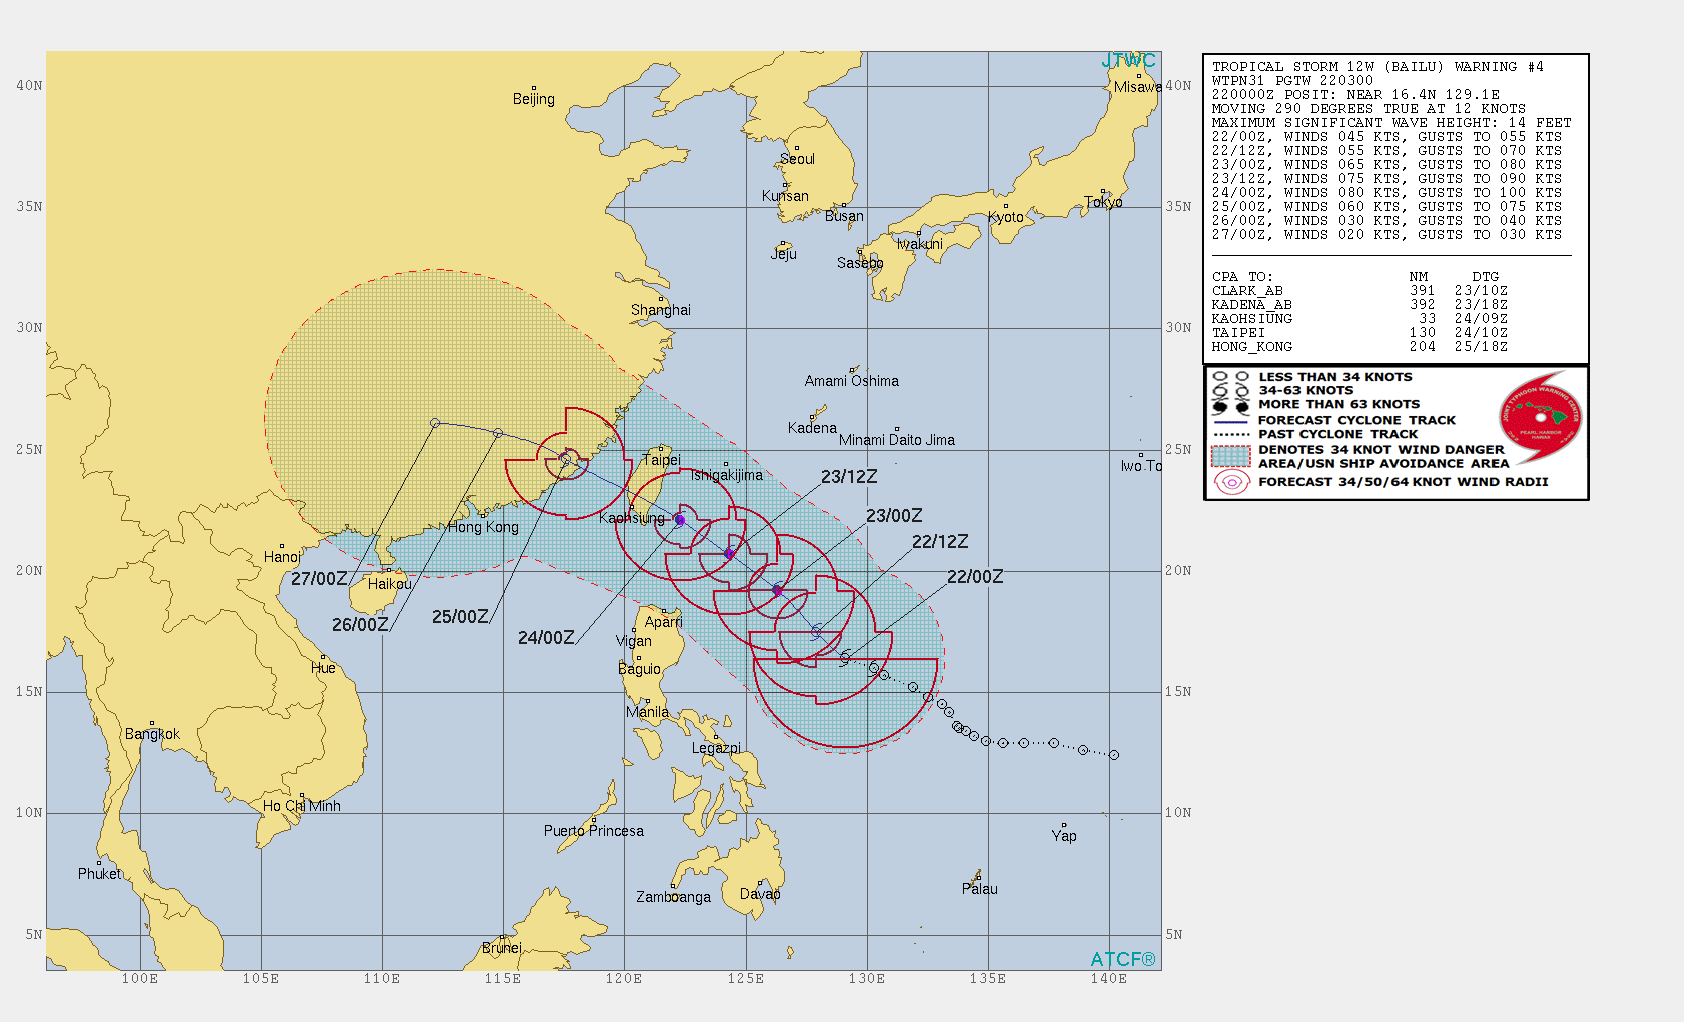 TS Bailu(12W) forecast to be a Typhoon within 24h, landfall in Taiwan shortly before 72h